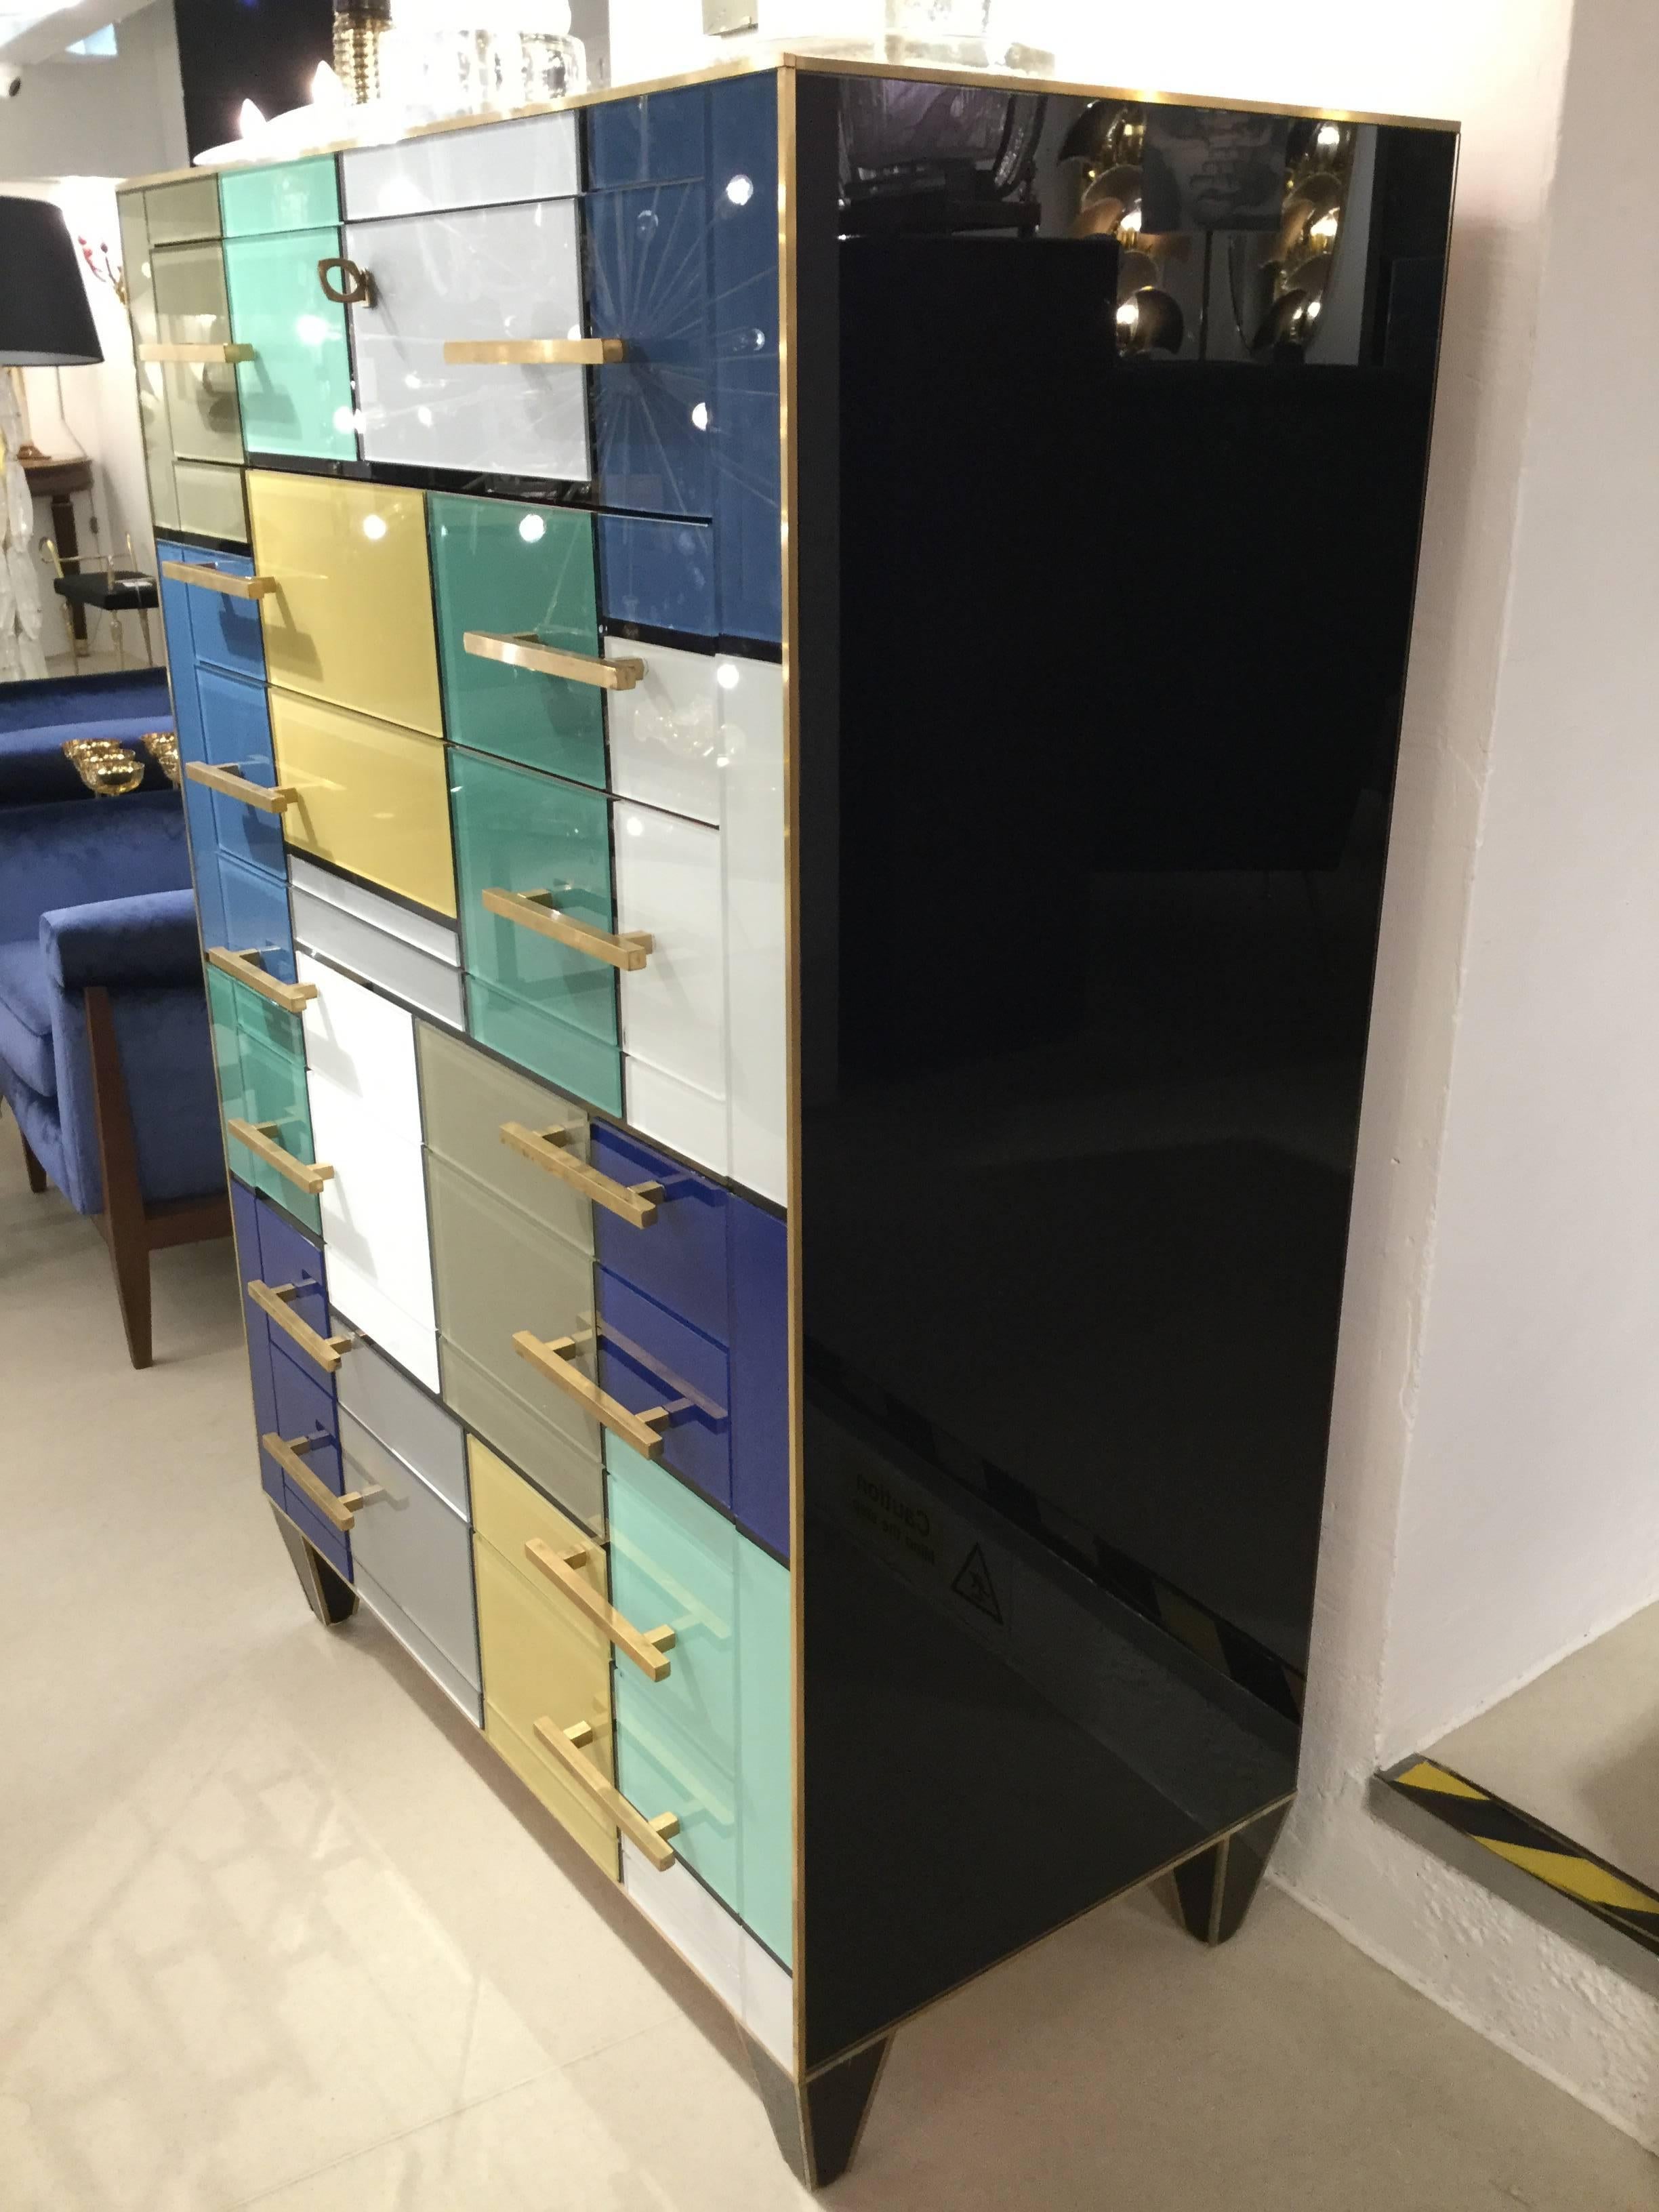 An Italian Venitian designed 7 day chest of drawers in multicolour glass profiled in brass also brass handles. Like an art installation style of Mondrian, circa 1970.